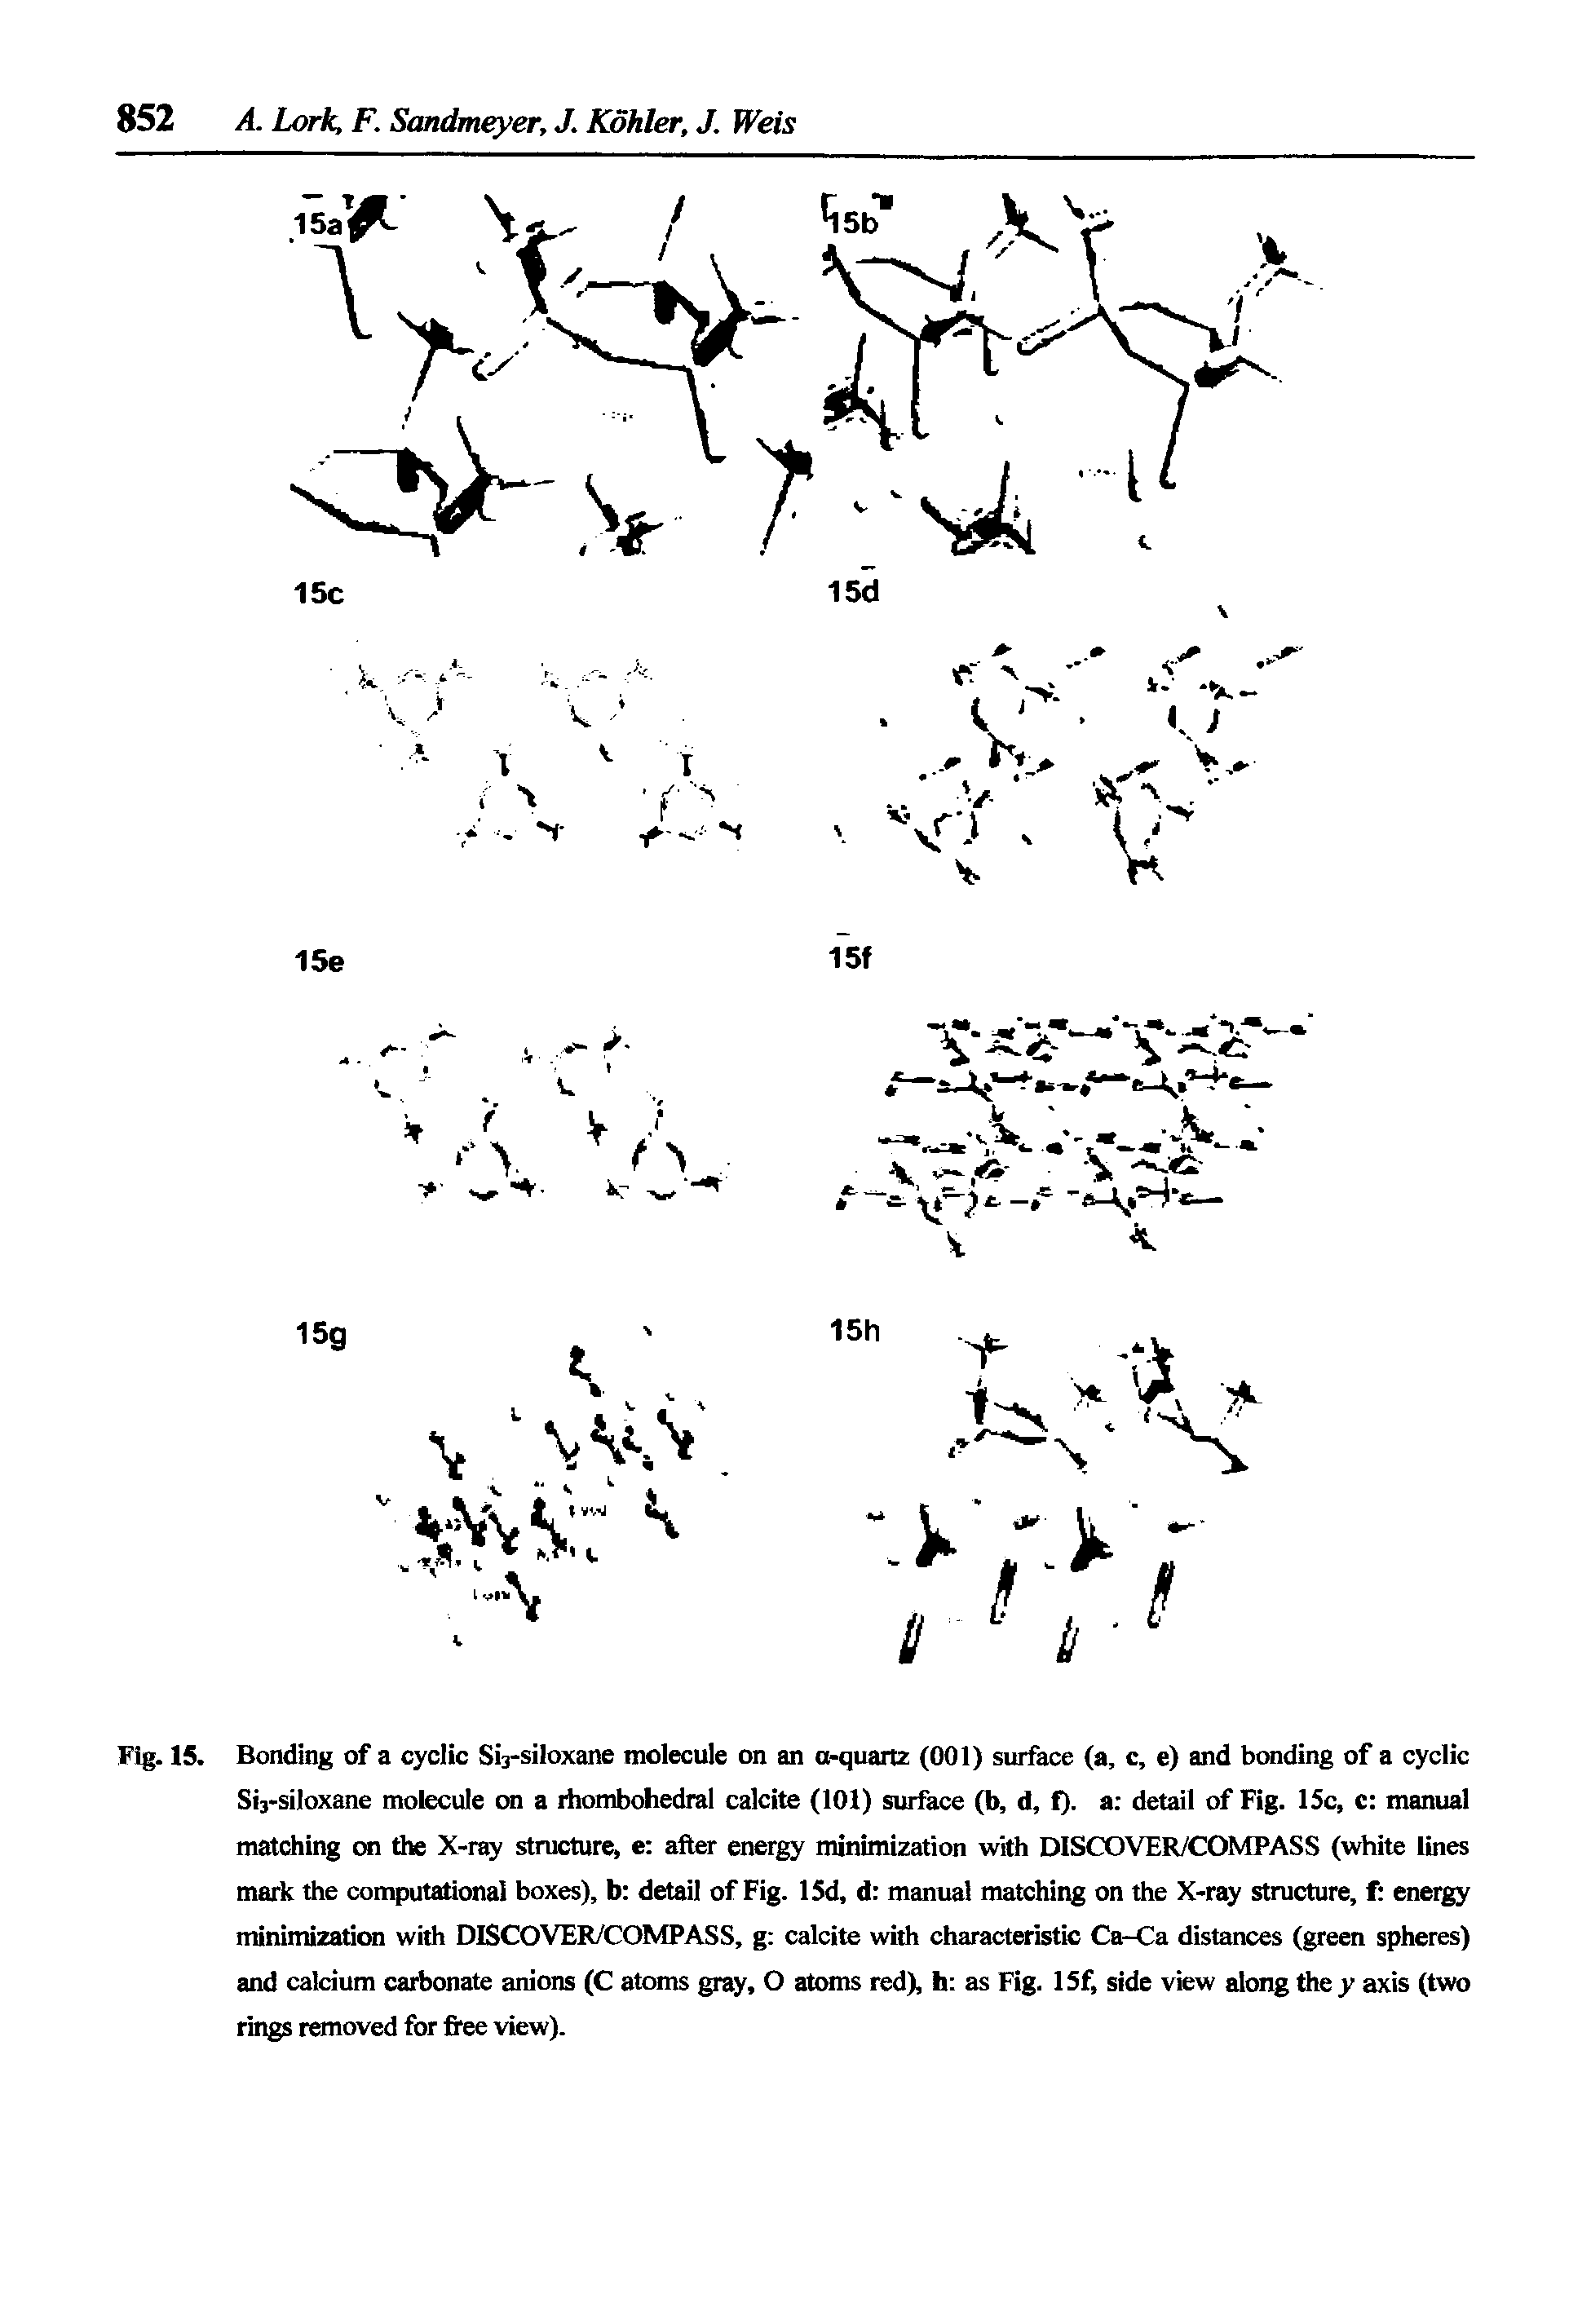 Fig. 15. Bonding of a cyclic Si3-siloxane molecule on an a-quartz (001) surface (a, c, e) and bonding of a cyclic Sis-siloxane molecule on a rhombohedral calcite (101) surface (b, d, f). a detail of Fig. ISc, c manual matching on the X-ray structure, e after energy minimization with DISCOVER/COMPASS (white lines mark the computational boxes), b detail of Fig. 15d, d manual matching on the X-ray structure, f energy minimization with DISCOVER/COMPASS, g calcite with characteristic Ca-Ca distances (green spheres) and calcium carbonate anions (C atoms gray, O atoms redX h as Fig. 15f, side view along the y axis (two rings removed for fi ee view).